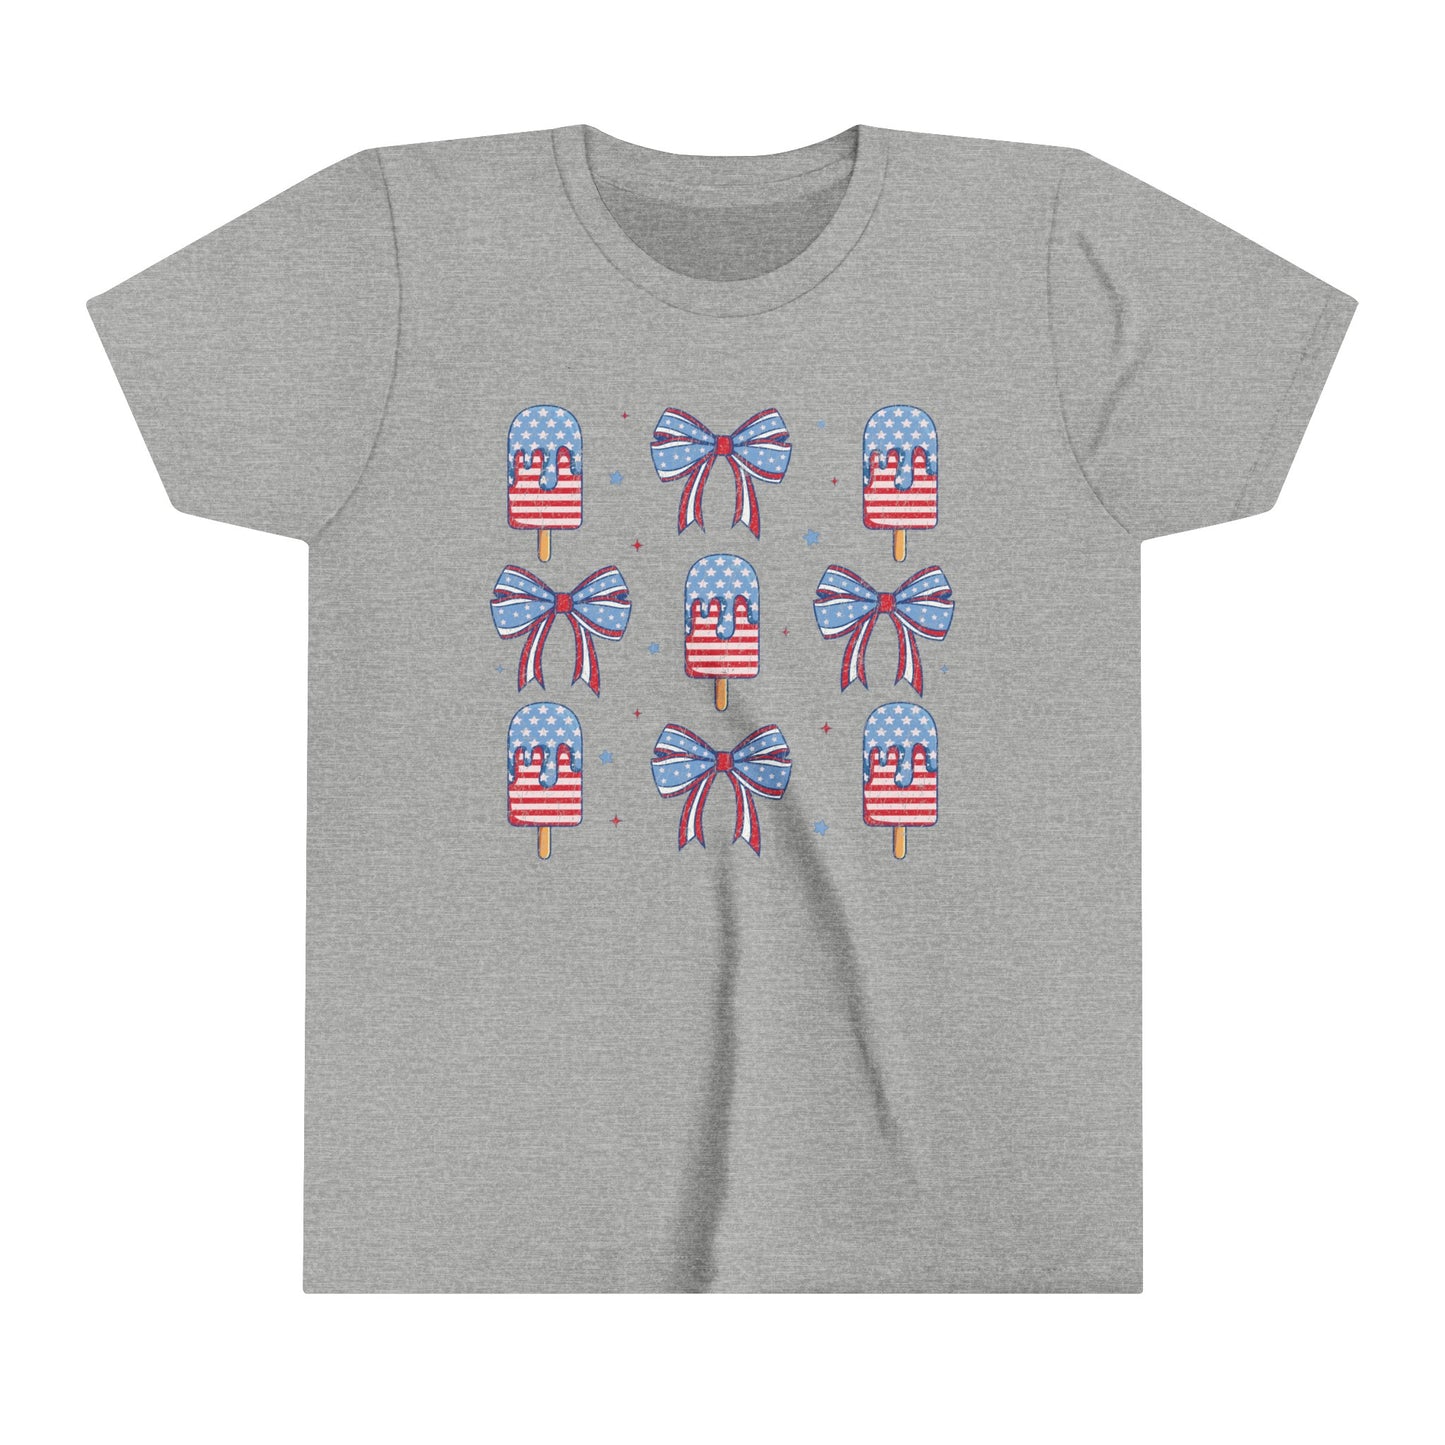 Popsicle and Ribbons 4th of July USA Youth Shirt